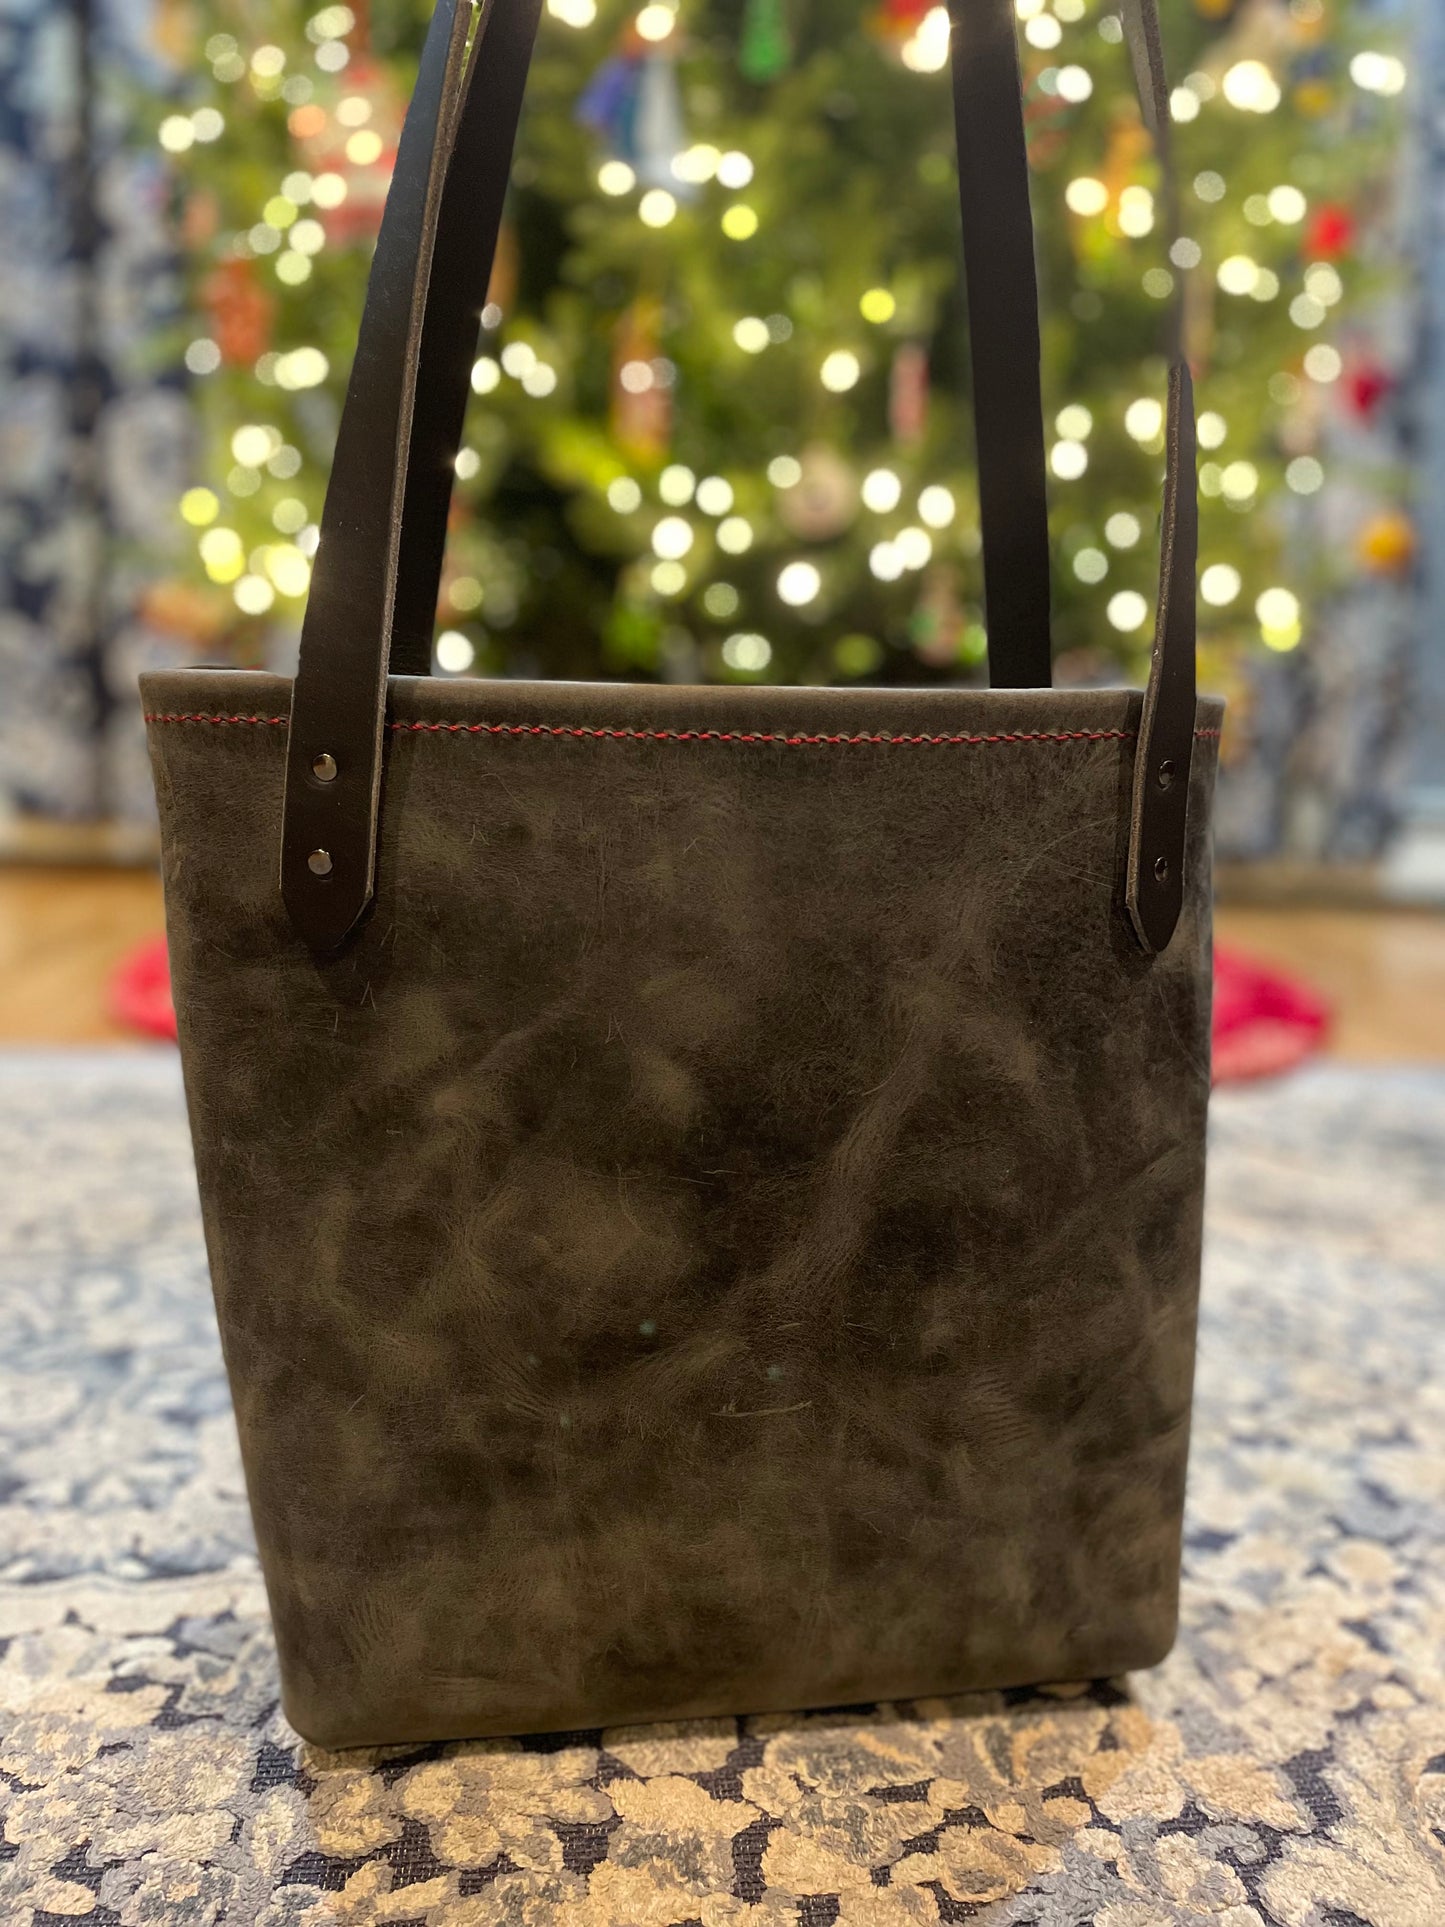 Handmade Leather Tote bags - In Stock